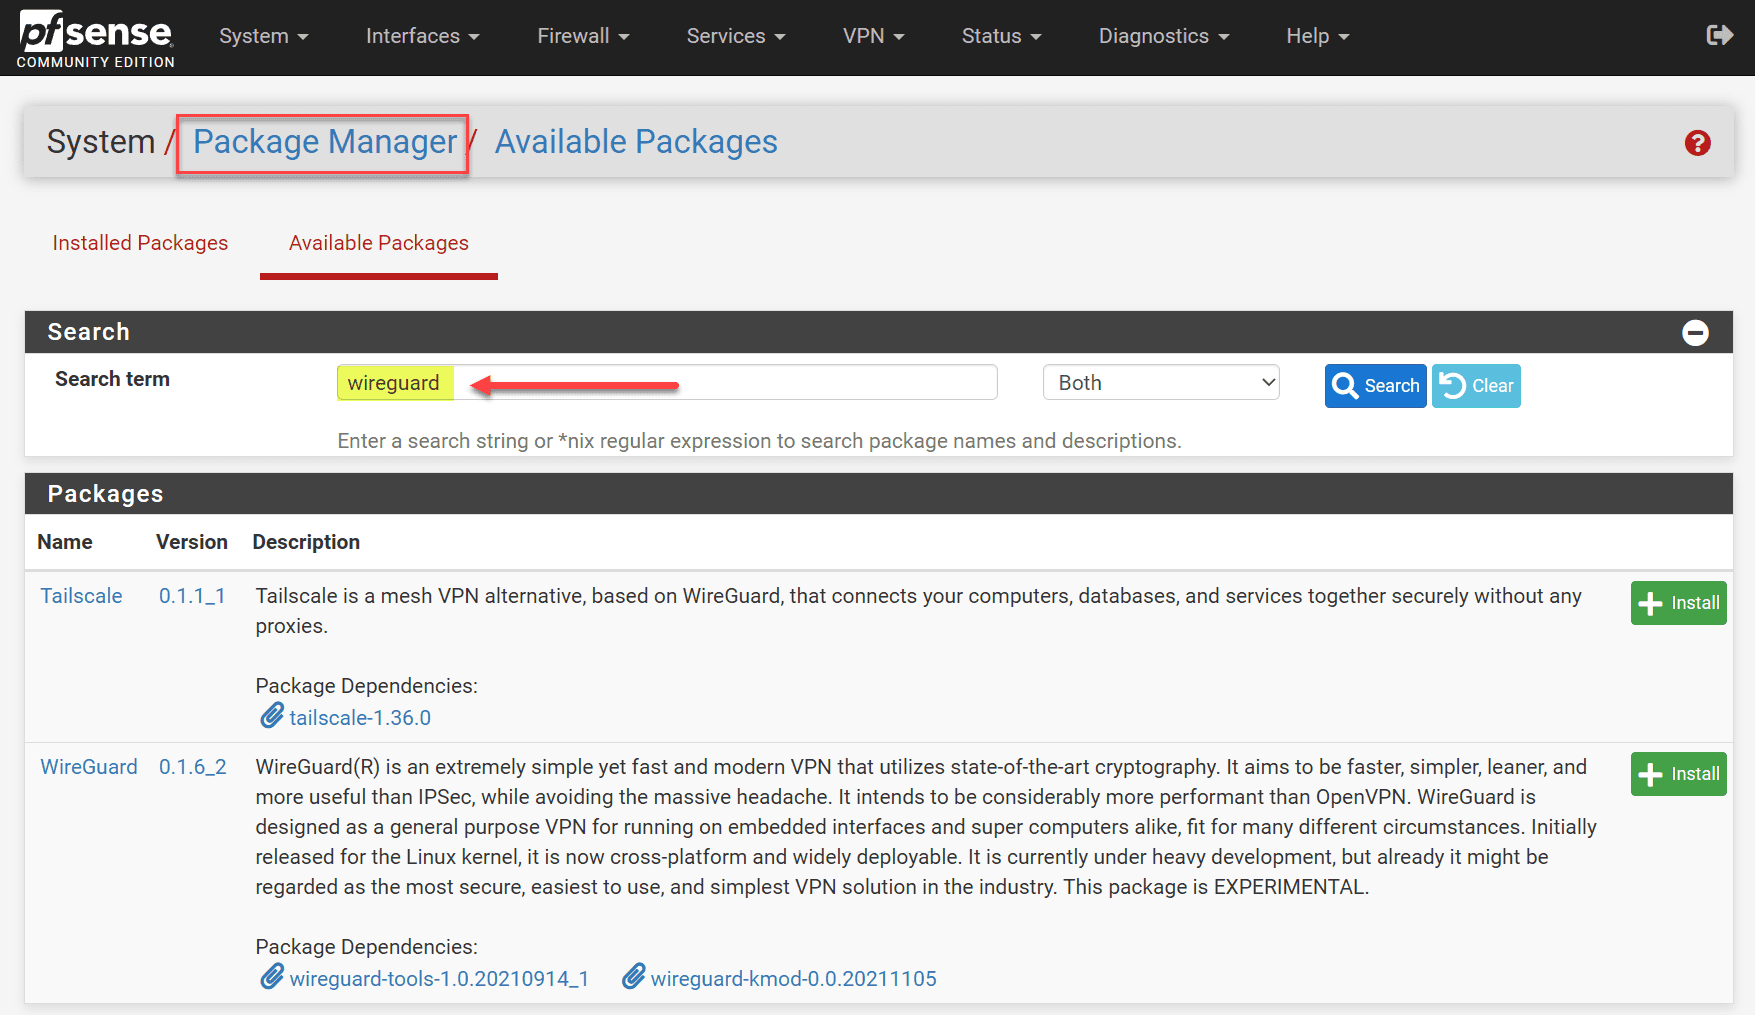 pfSense includes Wireguard as a system package for installation